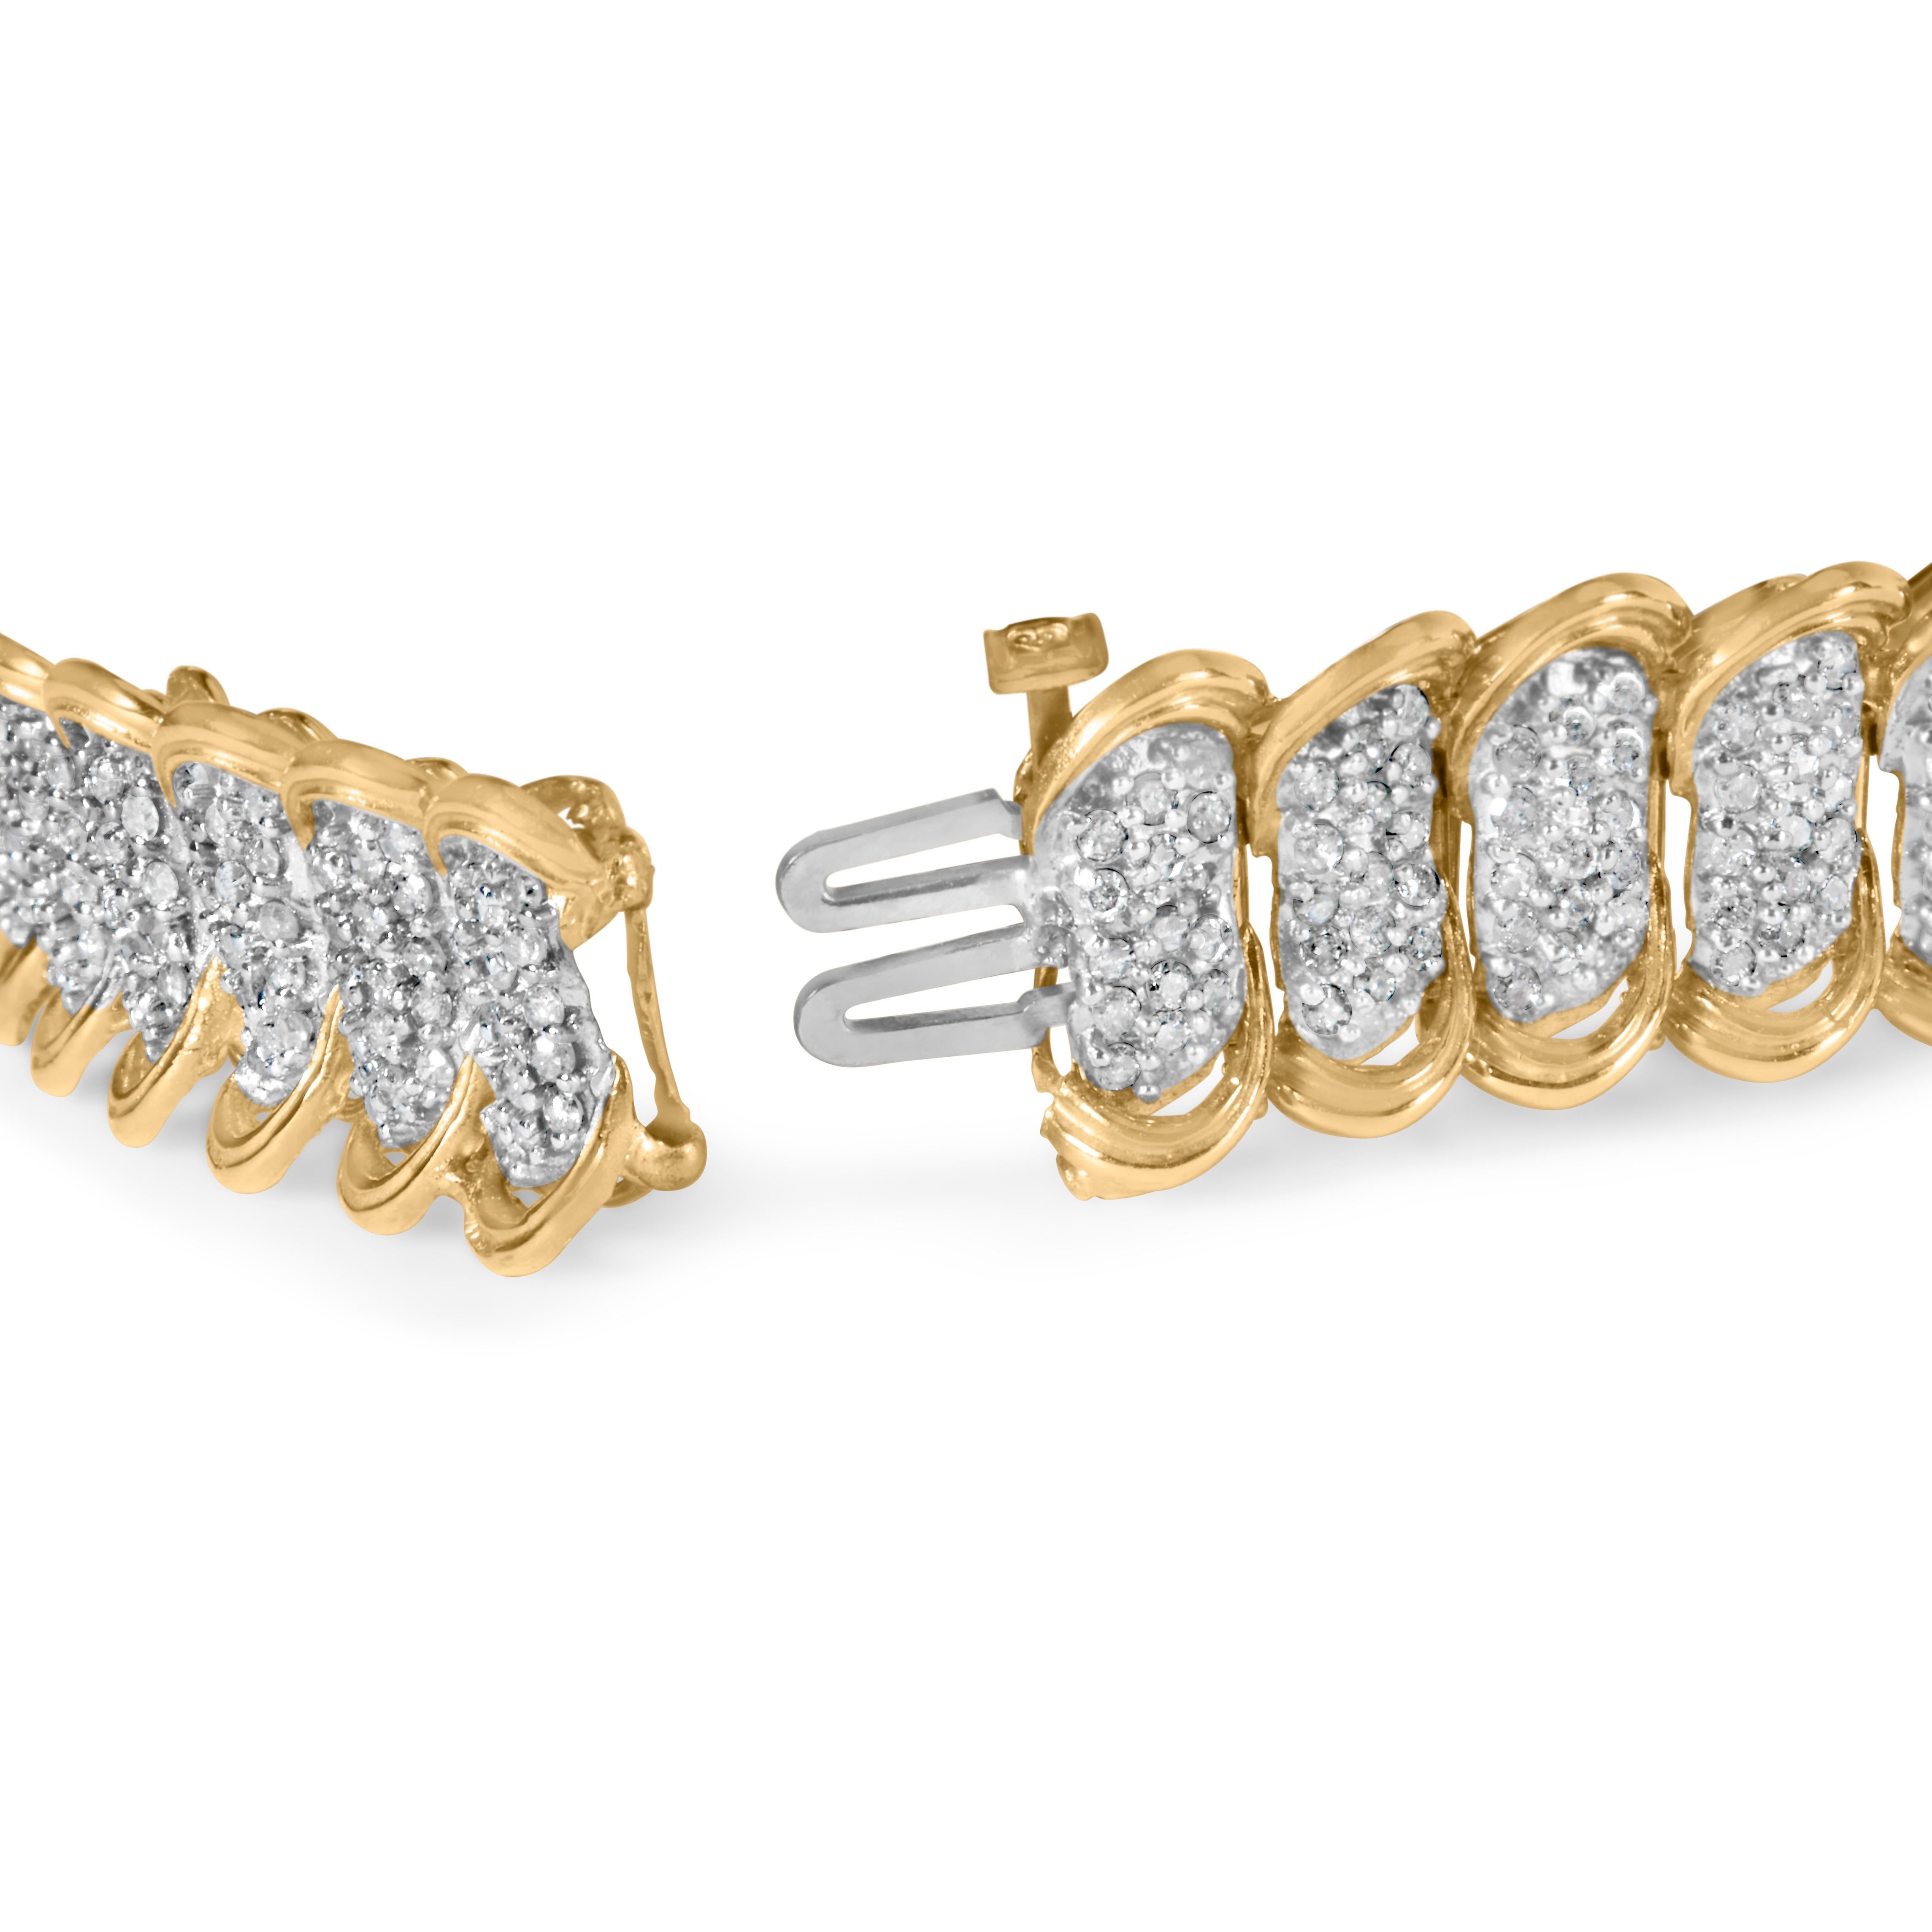 Indulge in the luxurious beauty of this exquisite 10K yellow gold pave diamond link bracelet. Adorned with 480 round diamonds, the bracelet's 4.0 cttw total weight radiates a breathtaking brilliance, each diamond boasting a natural origin, I-J